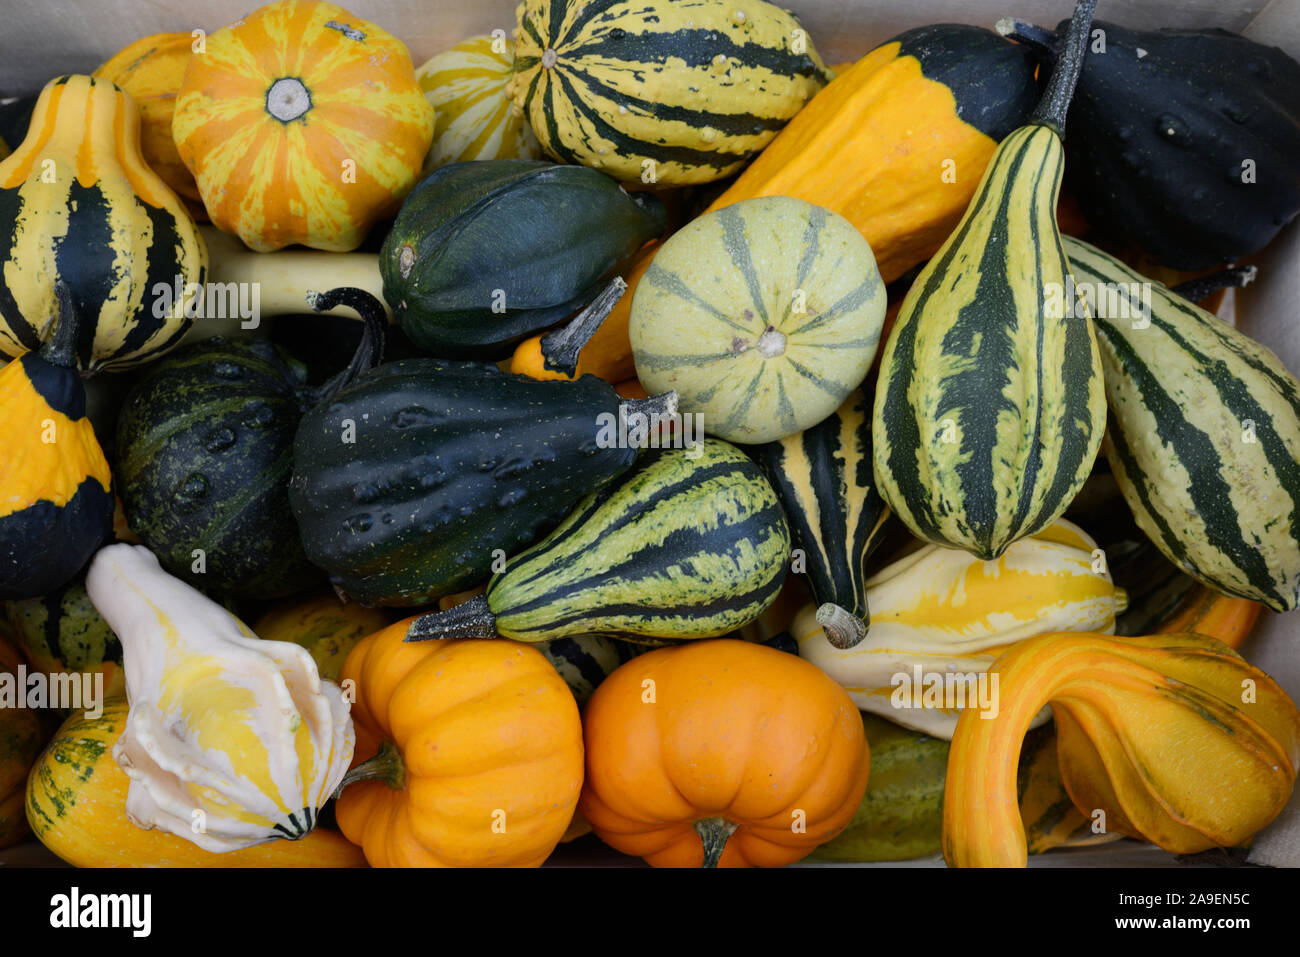 Crate of Gourds or Display of Gourds Stock Photo